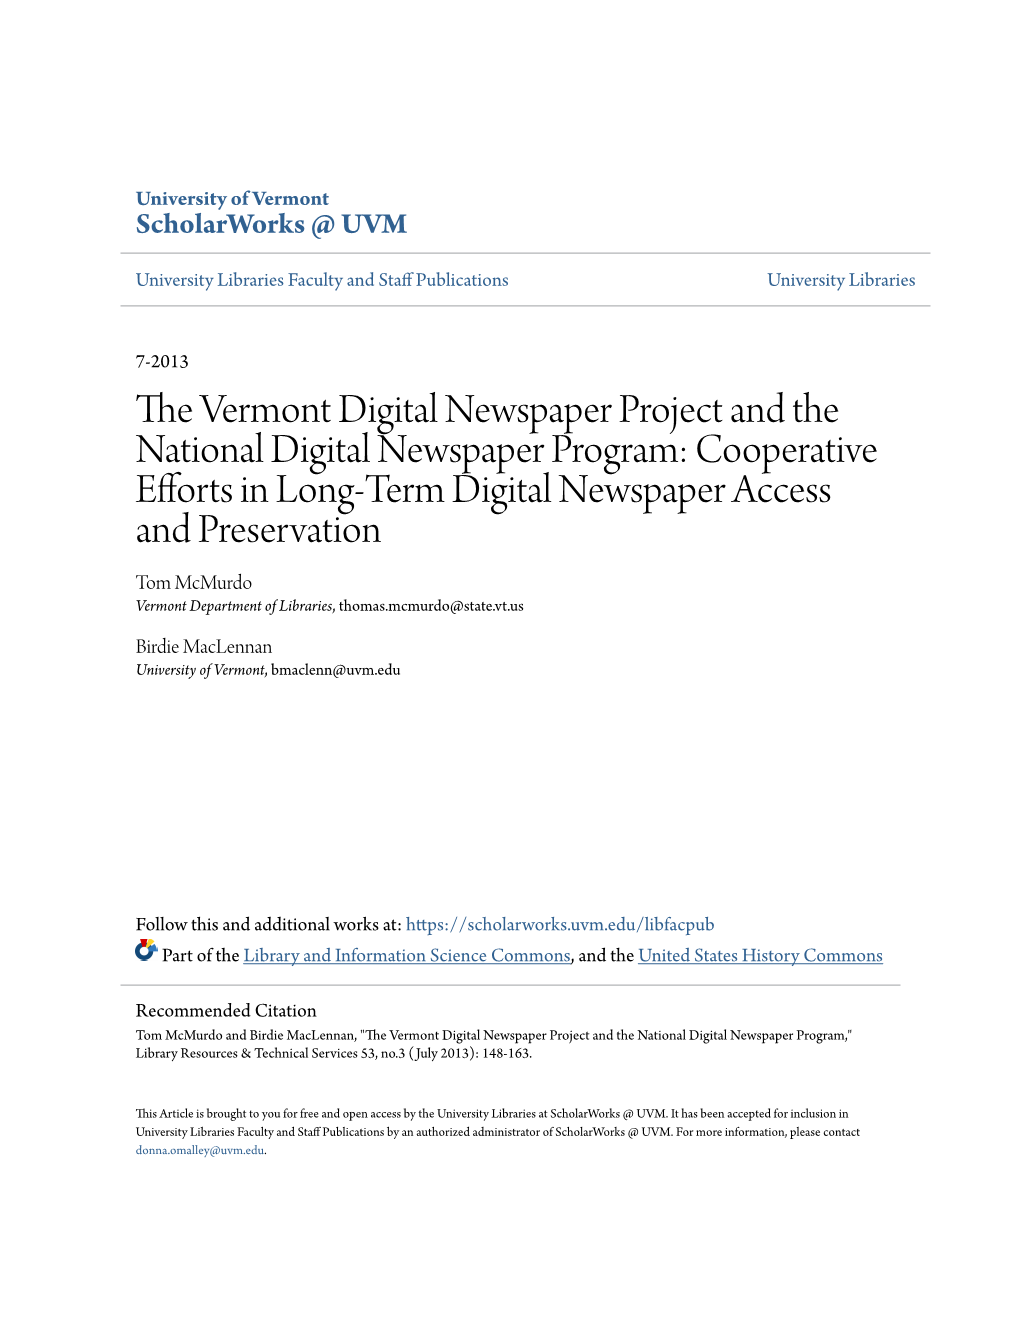 The Vermont Digital Newspaper Project and the National Digital Newspaper Program Cooperative Efforts in Long-Term Digital Newspaper Access and Preservation